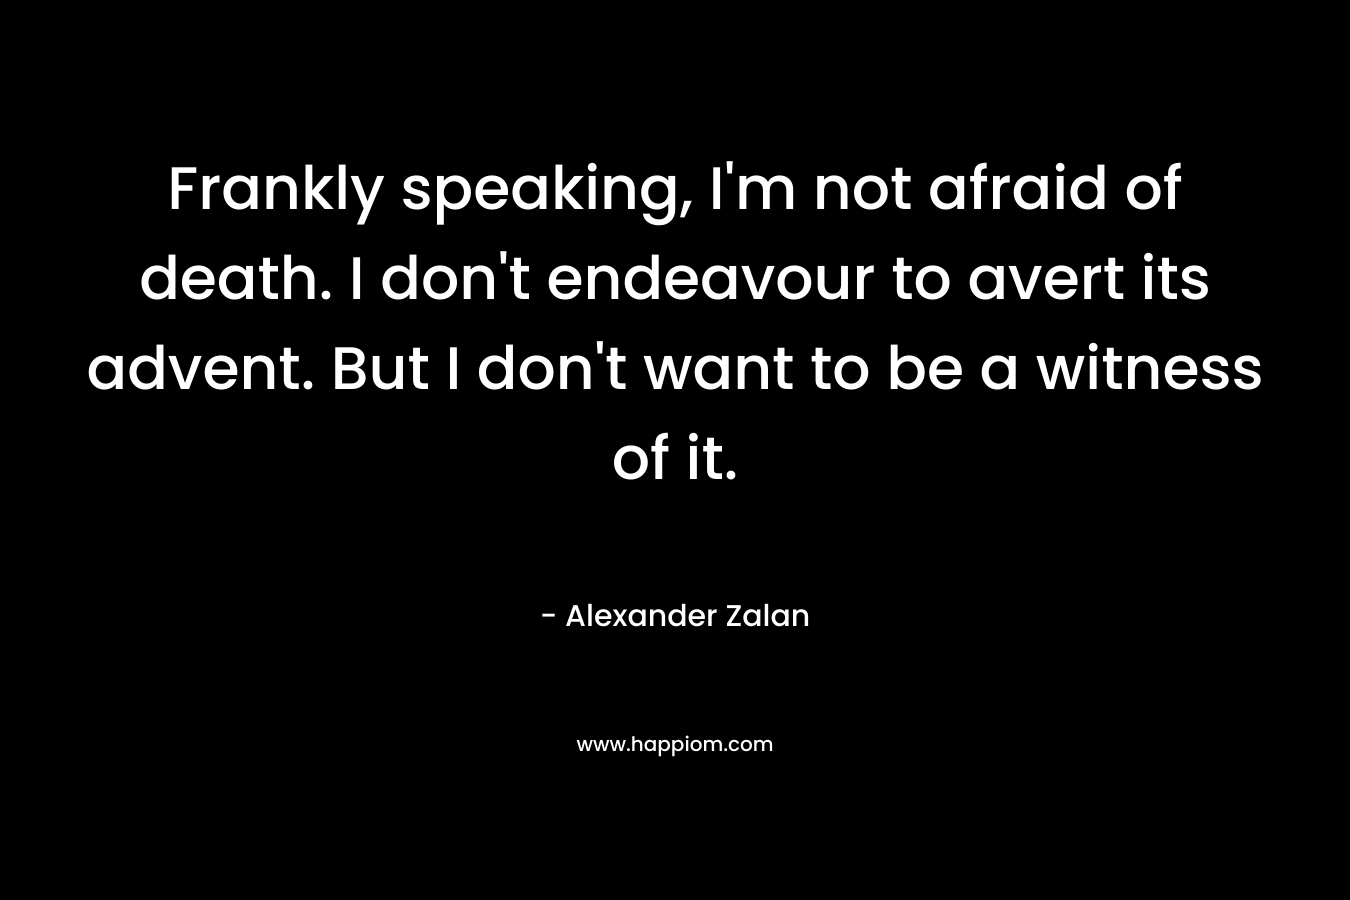 Frankly speaking, I’m not afraid of death. I don’t endeavour to avert its advent. But I don’t want to be a witness of it. – Alexander Zalan